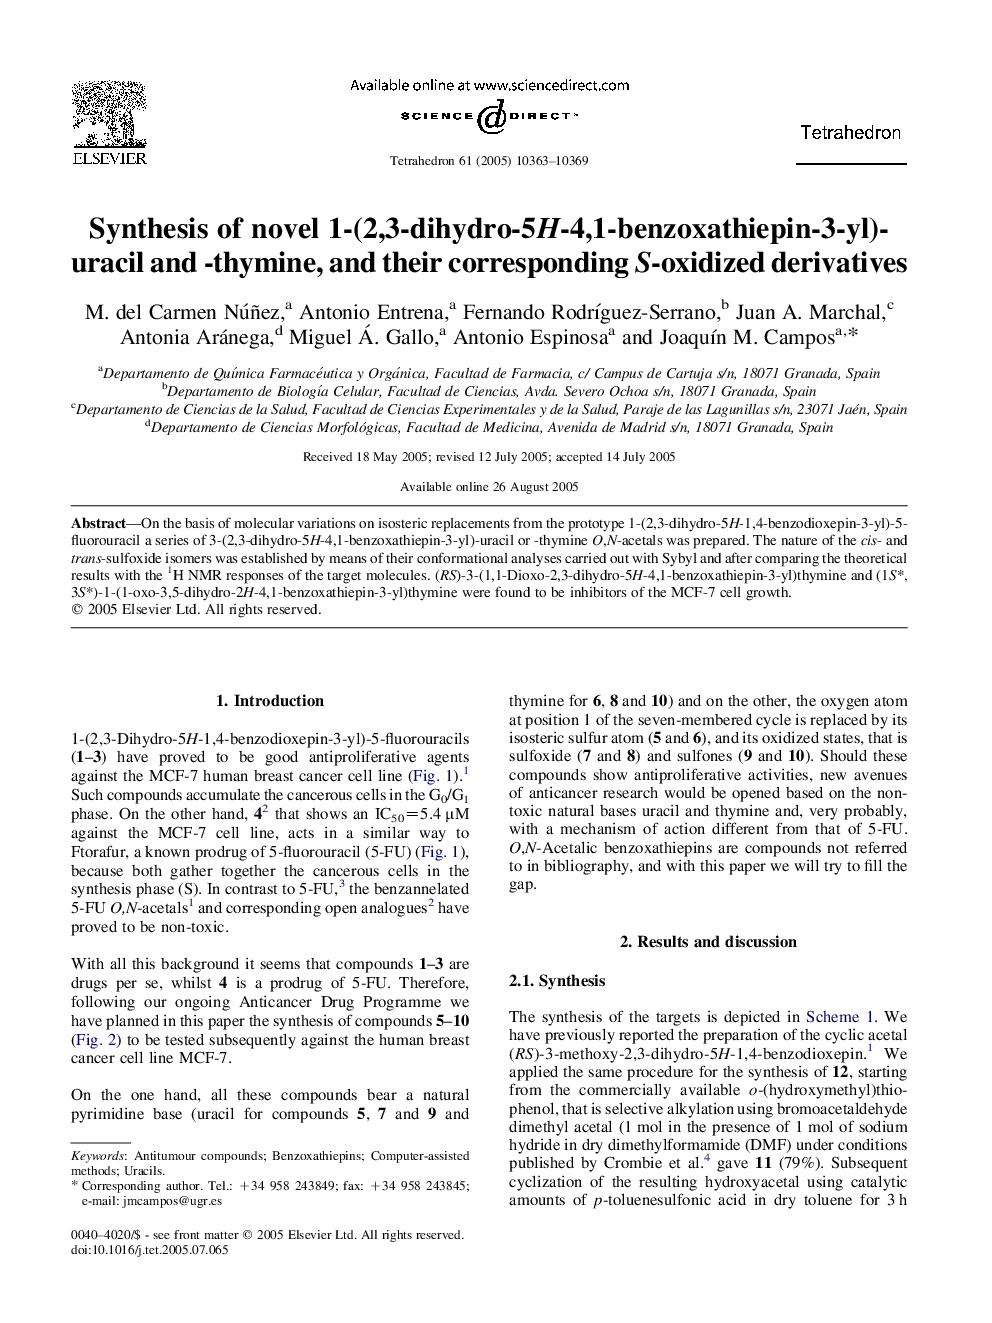 Synthesis of novel 1-(2,3-dihydro-5H-4,1-benzoxathiepin-3-yl)-uracil and -thymine, and their corresponding S-oxidized derivatives